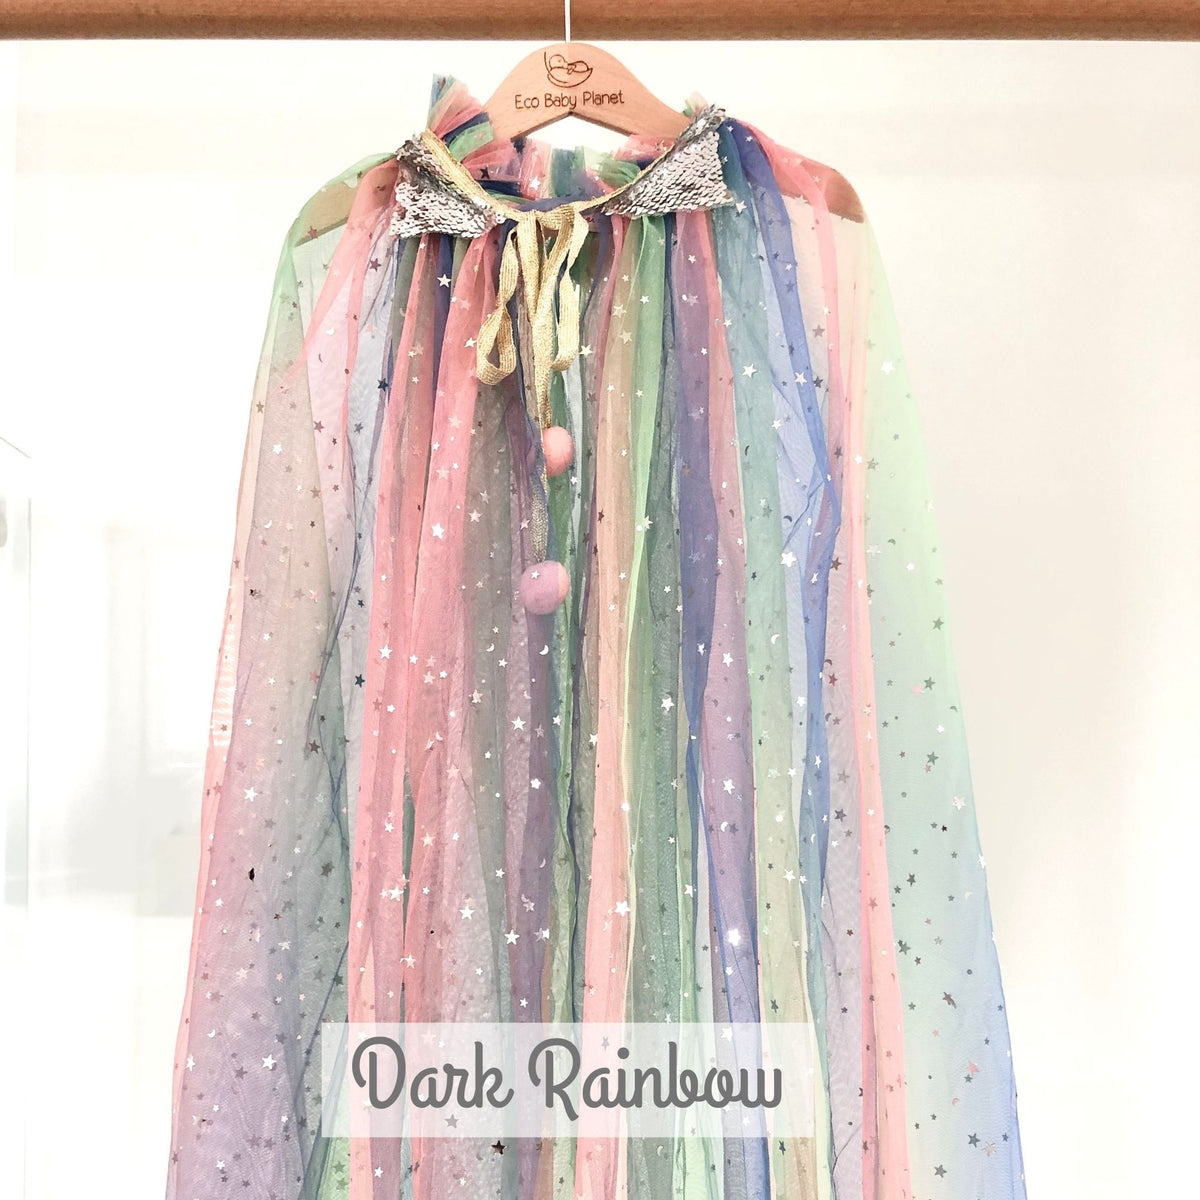 Kids Capes, Fairy Veil, Princess Cloak - Flower Girl, Birthday Party - 3, 4, 5, 6 year old Girl Gift